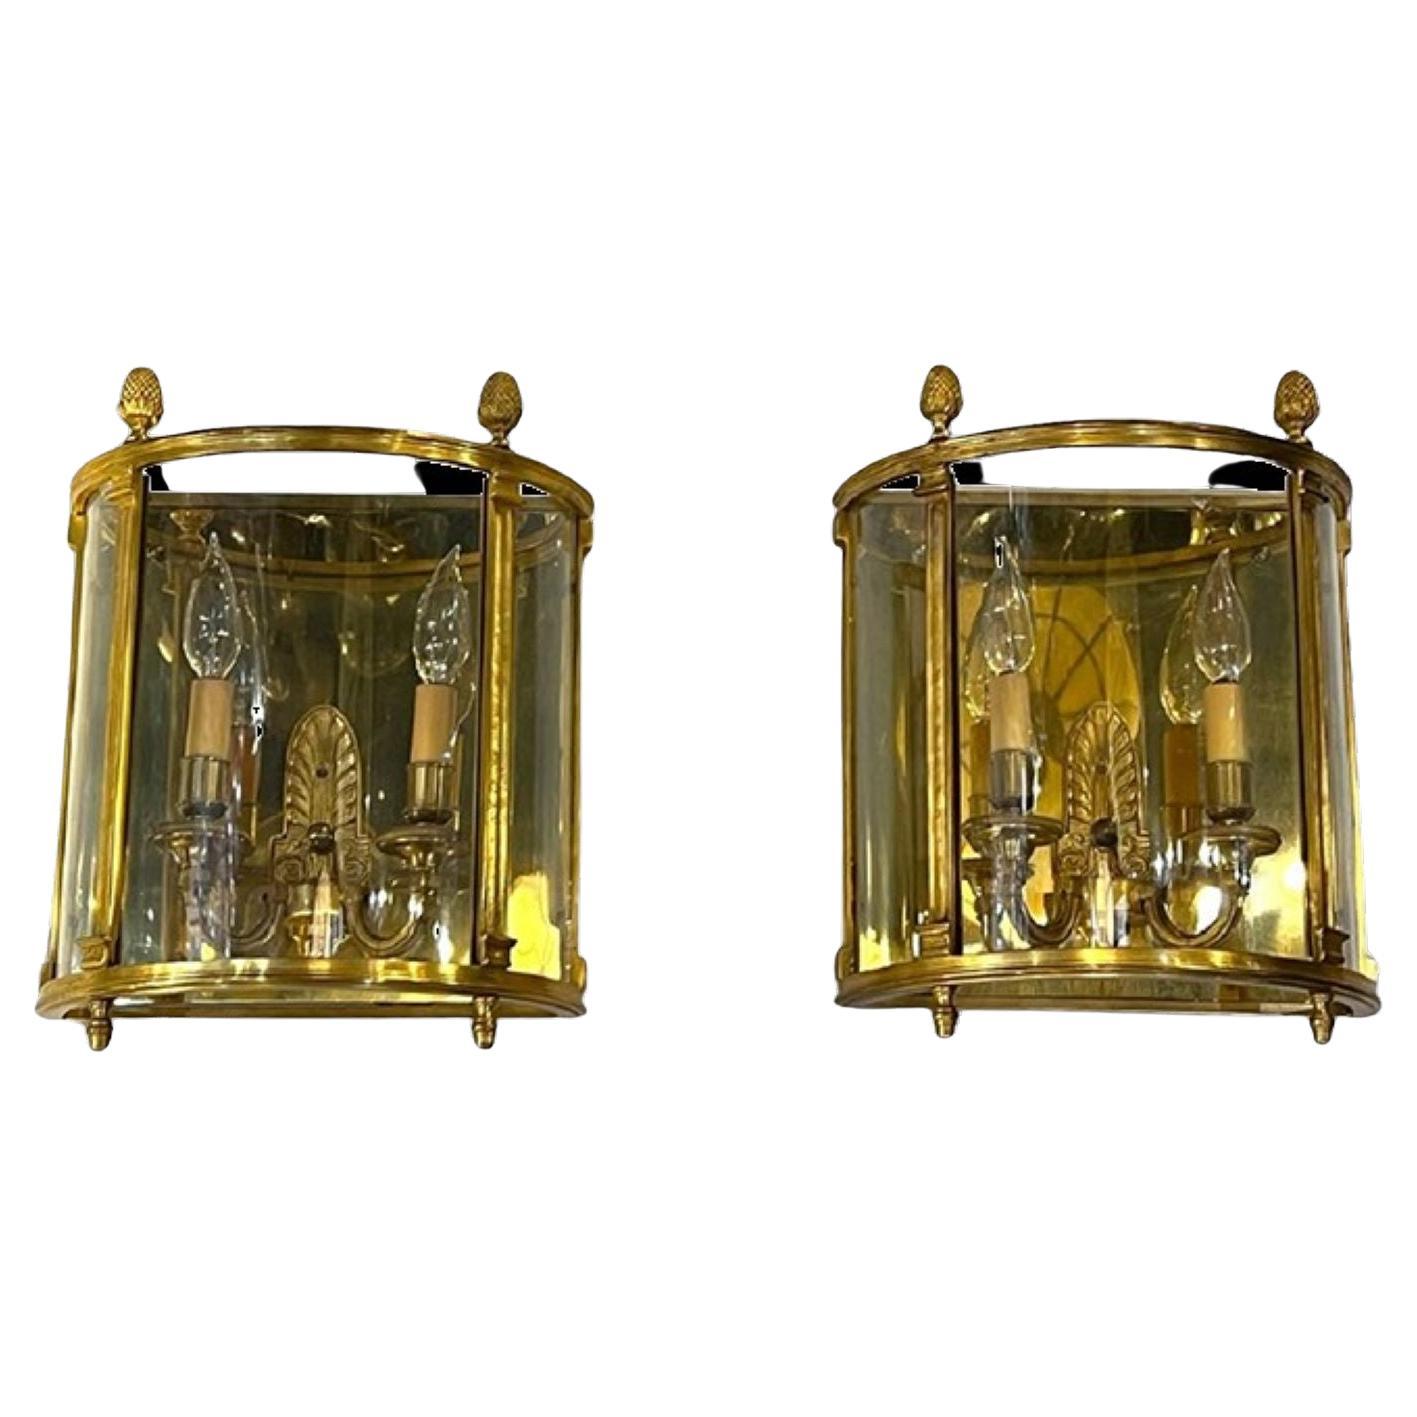 1930's French Empire Sconces